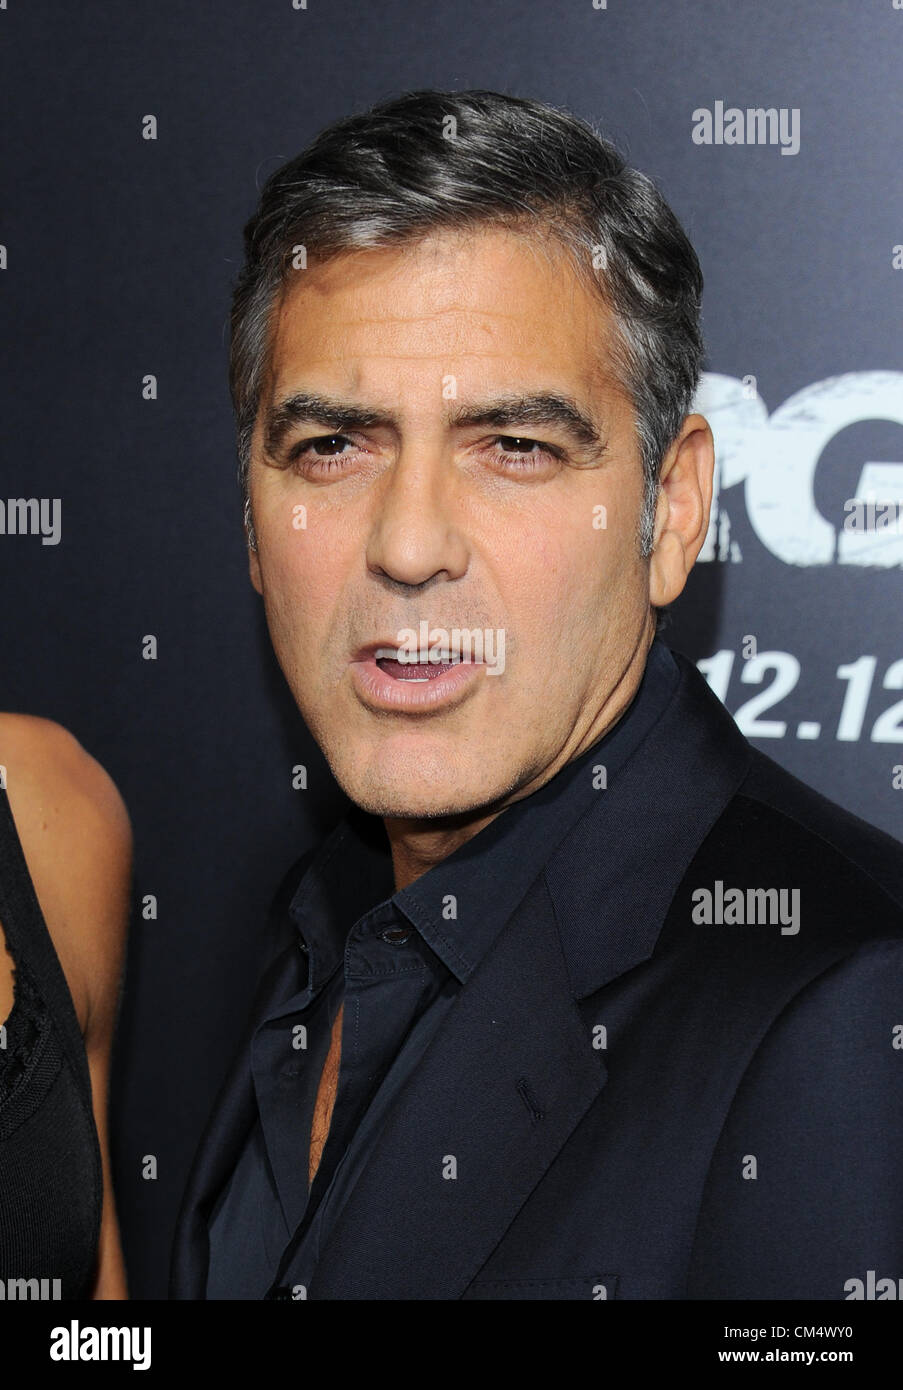 George Clooney at the film premiere for 'Argo' in Beverly Hills, CA Oct 4th 2012. USA. Stock Photo